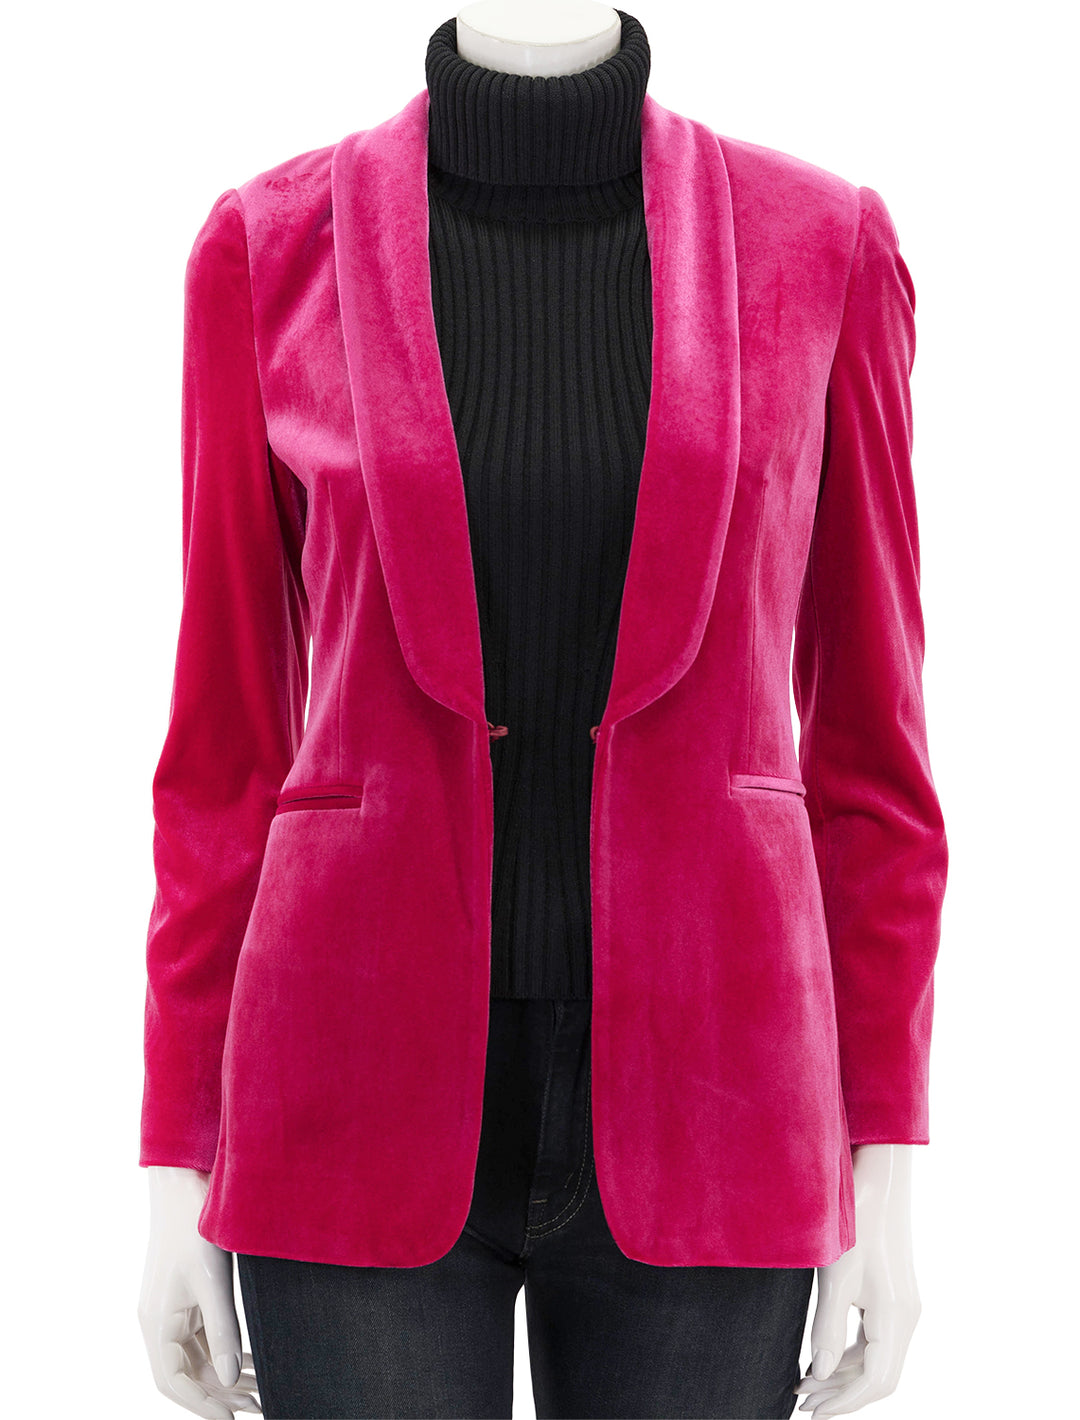 Front view of Vilagallo's pink velvet smoking jacket, unclasped.